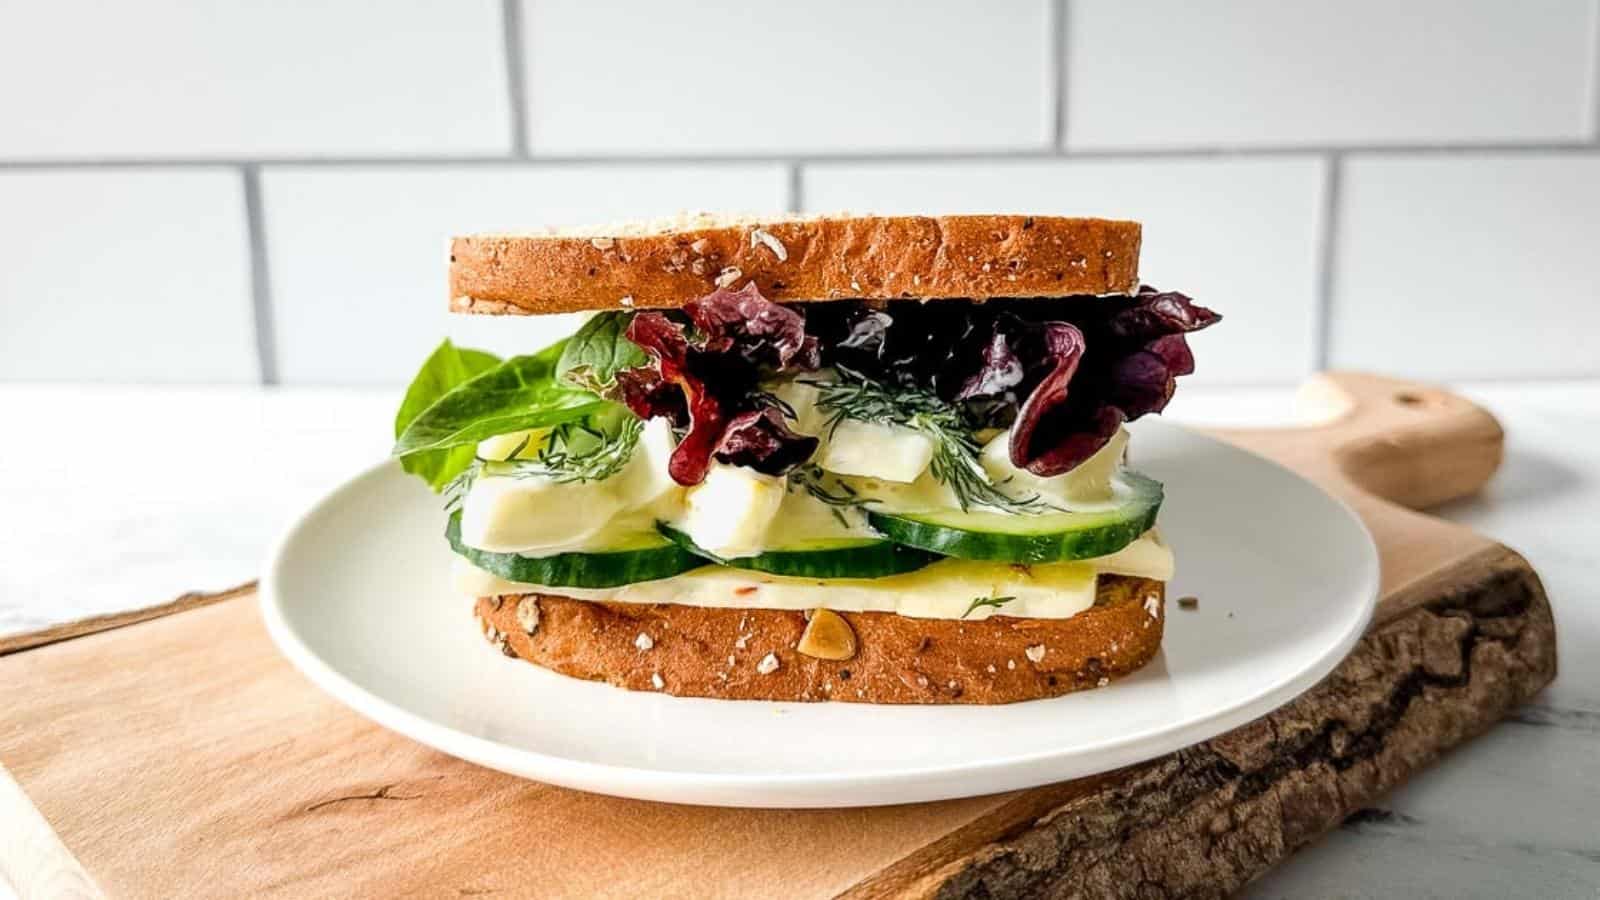 An egg and cucumber sandwich with pepper jack cheese, spring mix, and dill sauce is shown on a white plate over a rustic wooden cutting board.